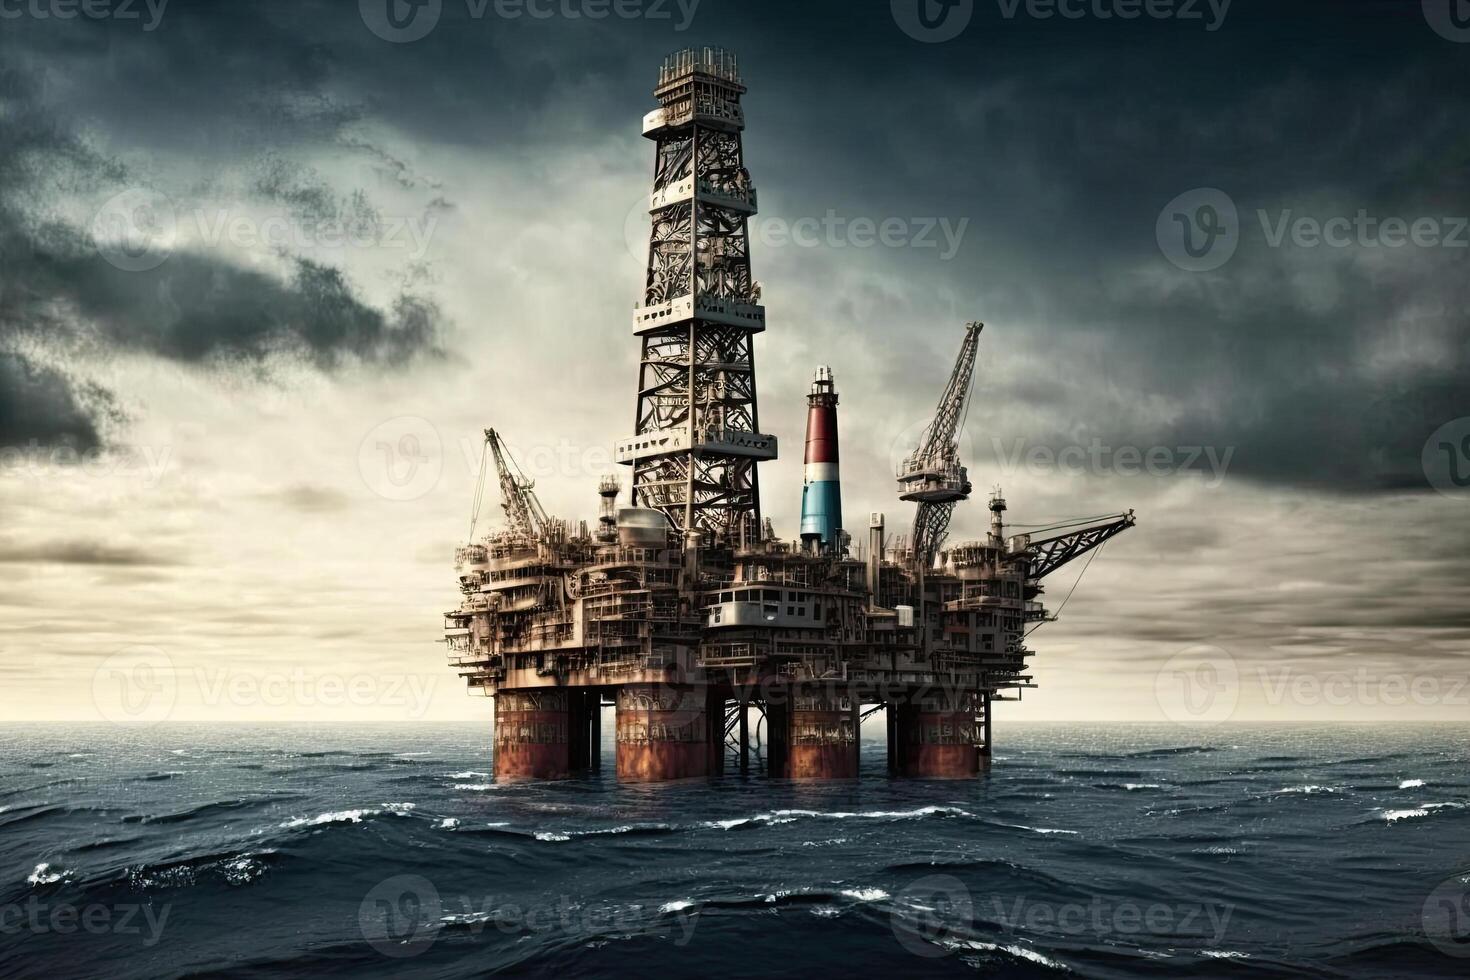 Offshore drilling rig at sea. Oil and gas industry. photo